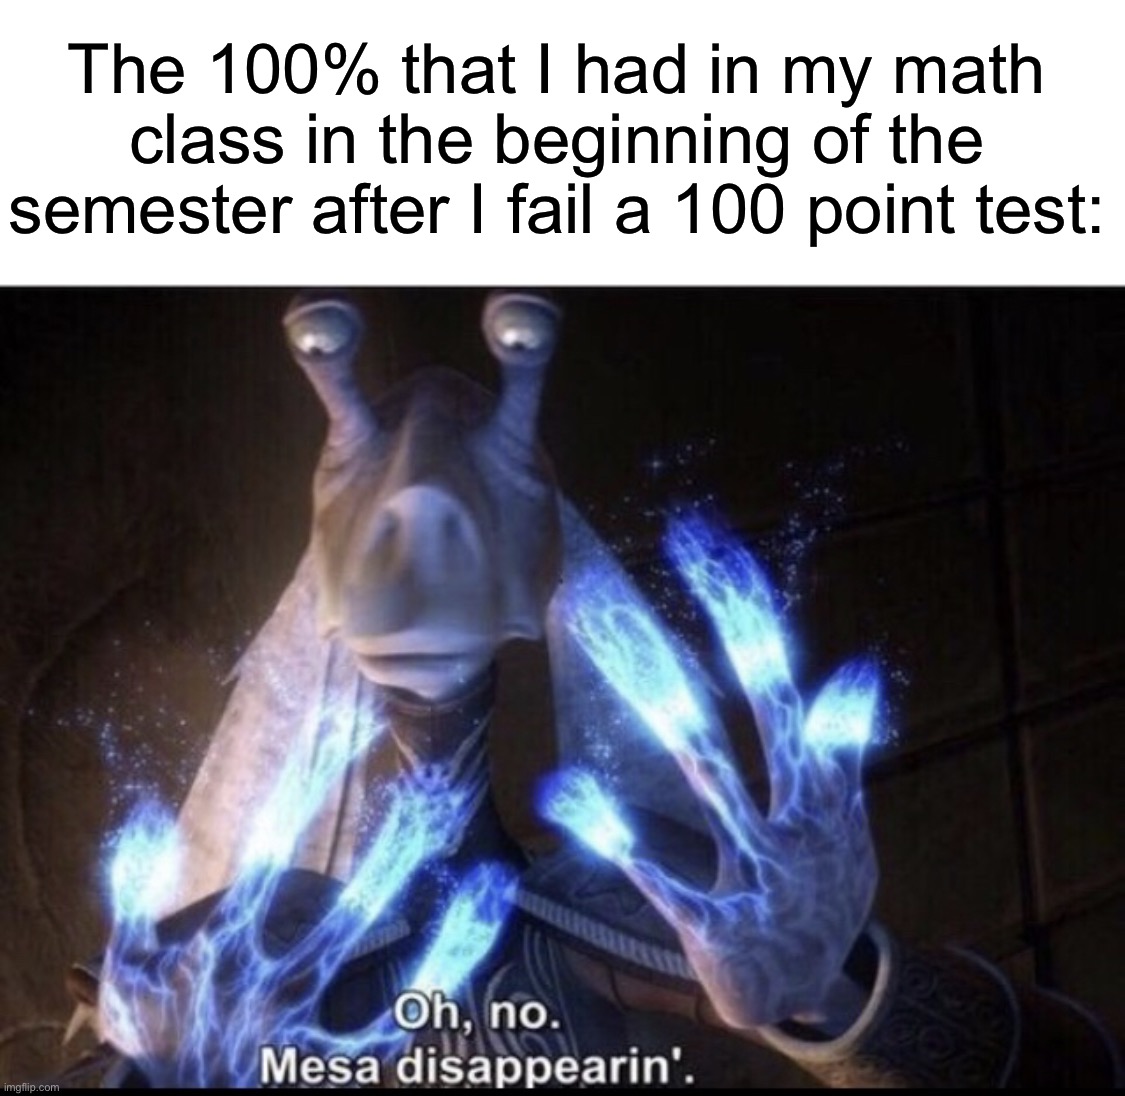 Wait nooooooooo… | The 100% that I had in my math class in the beginning of the semester after I fail a 100 point test: | image tagged in mesa disappearing,memes,funny,true story,relatable memes,school | made w/ Imgflip meme maker